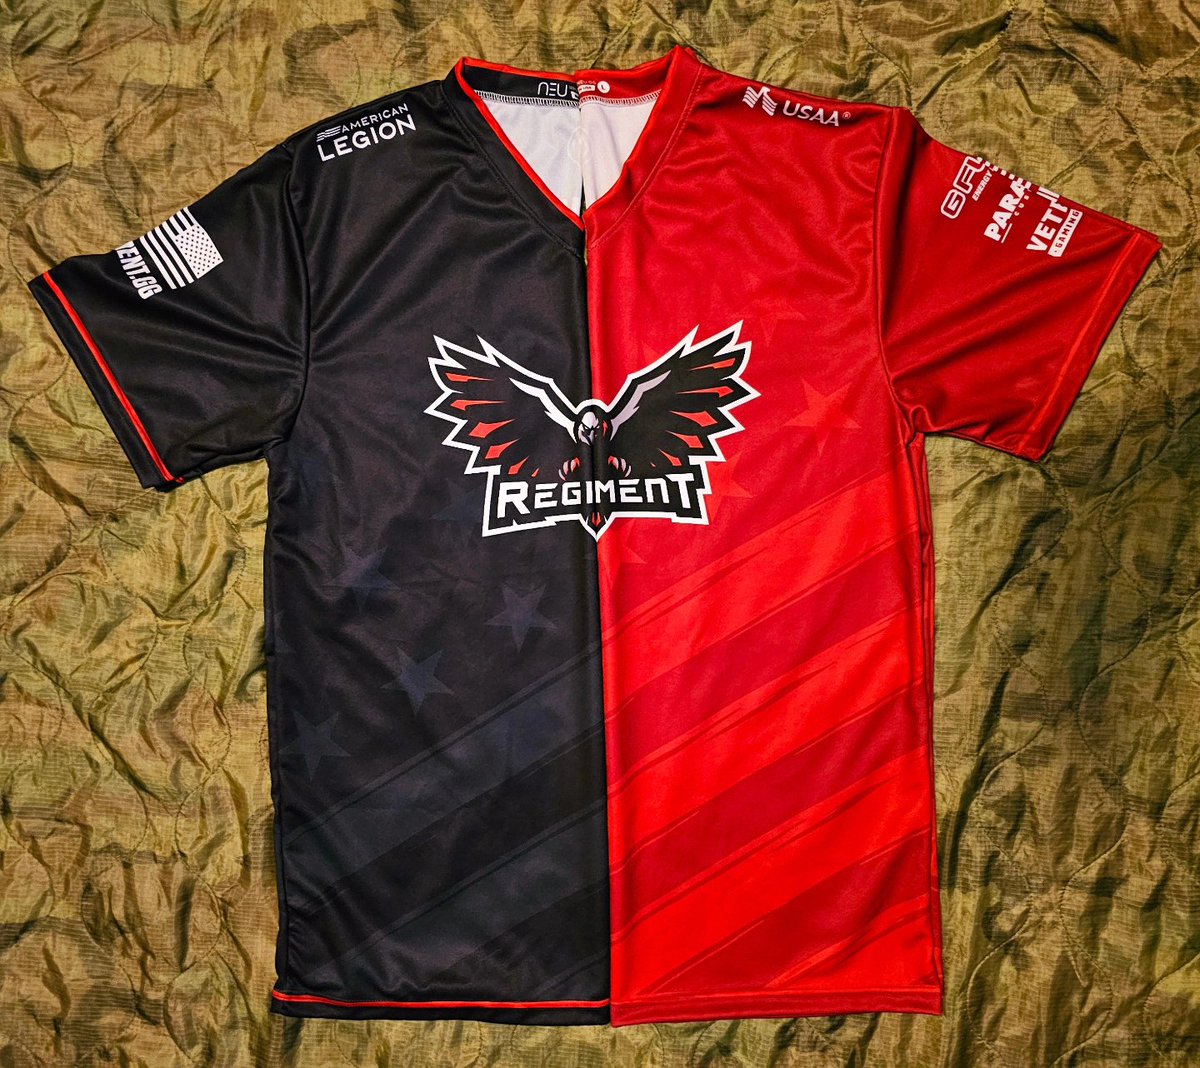 Thank you, @regimentgg, for the 2 jerseys from the photography contest. 

#instagood #instalike #follow #creative #creativephotography #red  #veteranphotographer #share #florida #veteran #black #veteranowned #combatveteran  #photographer #photography
#redandblack #gaming